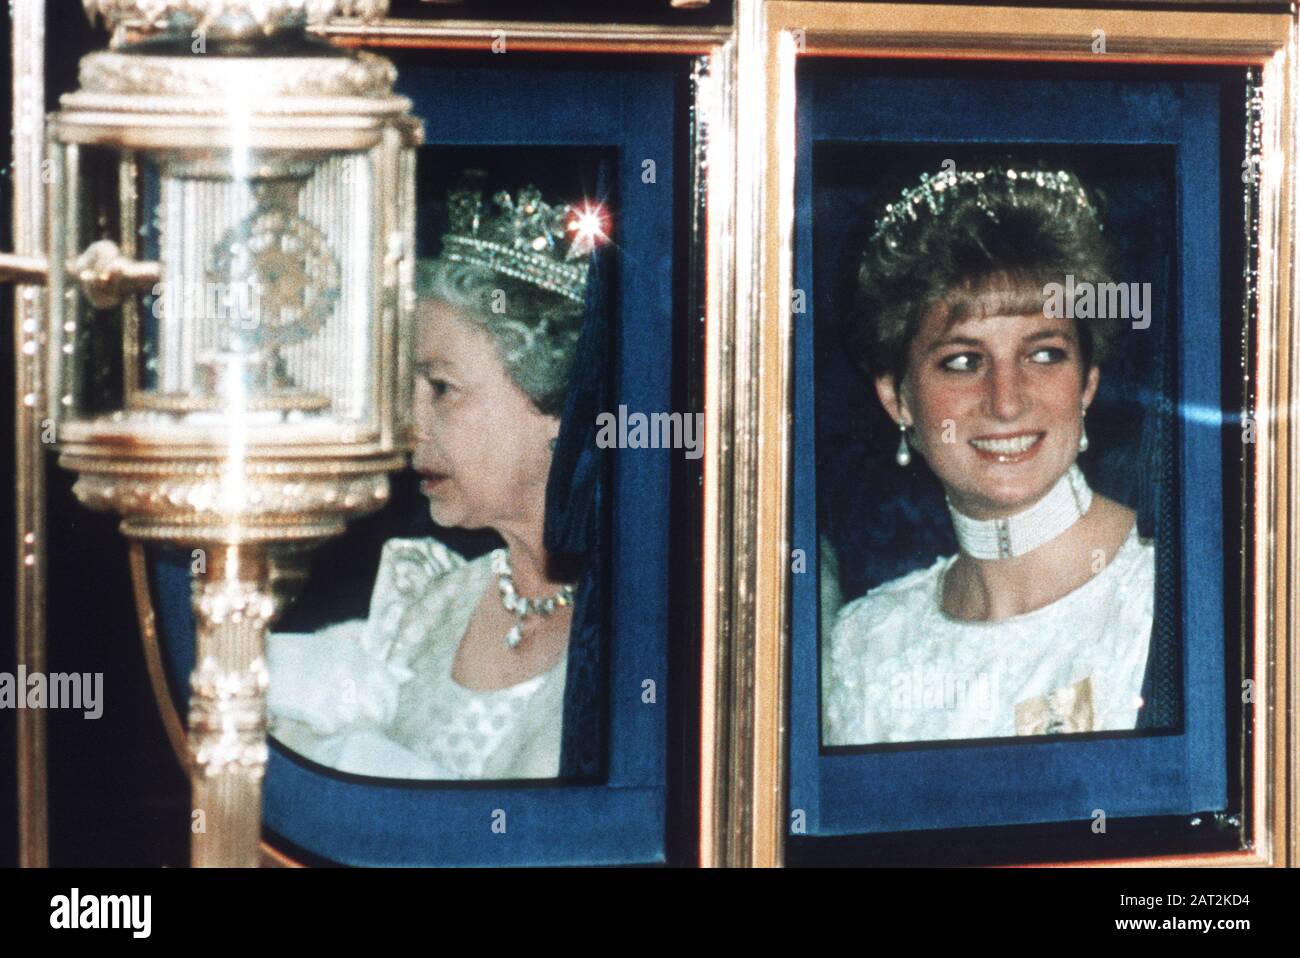 Queen Elizabeth II and Princess Diana arrive at The Palace of Westminster for the State Opening of Parliament, London, Britain Stock Photo